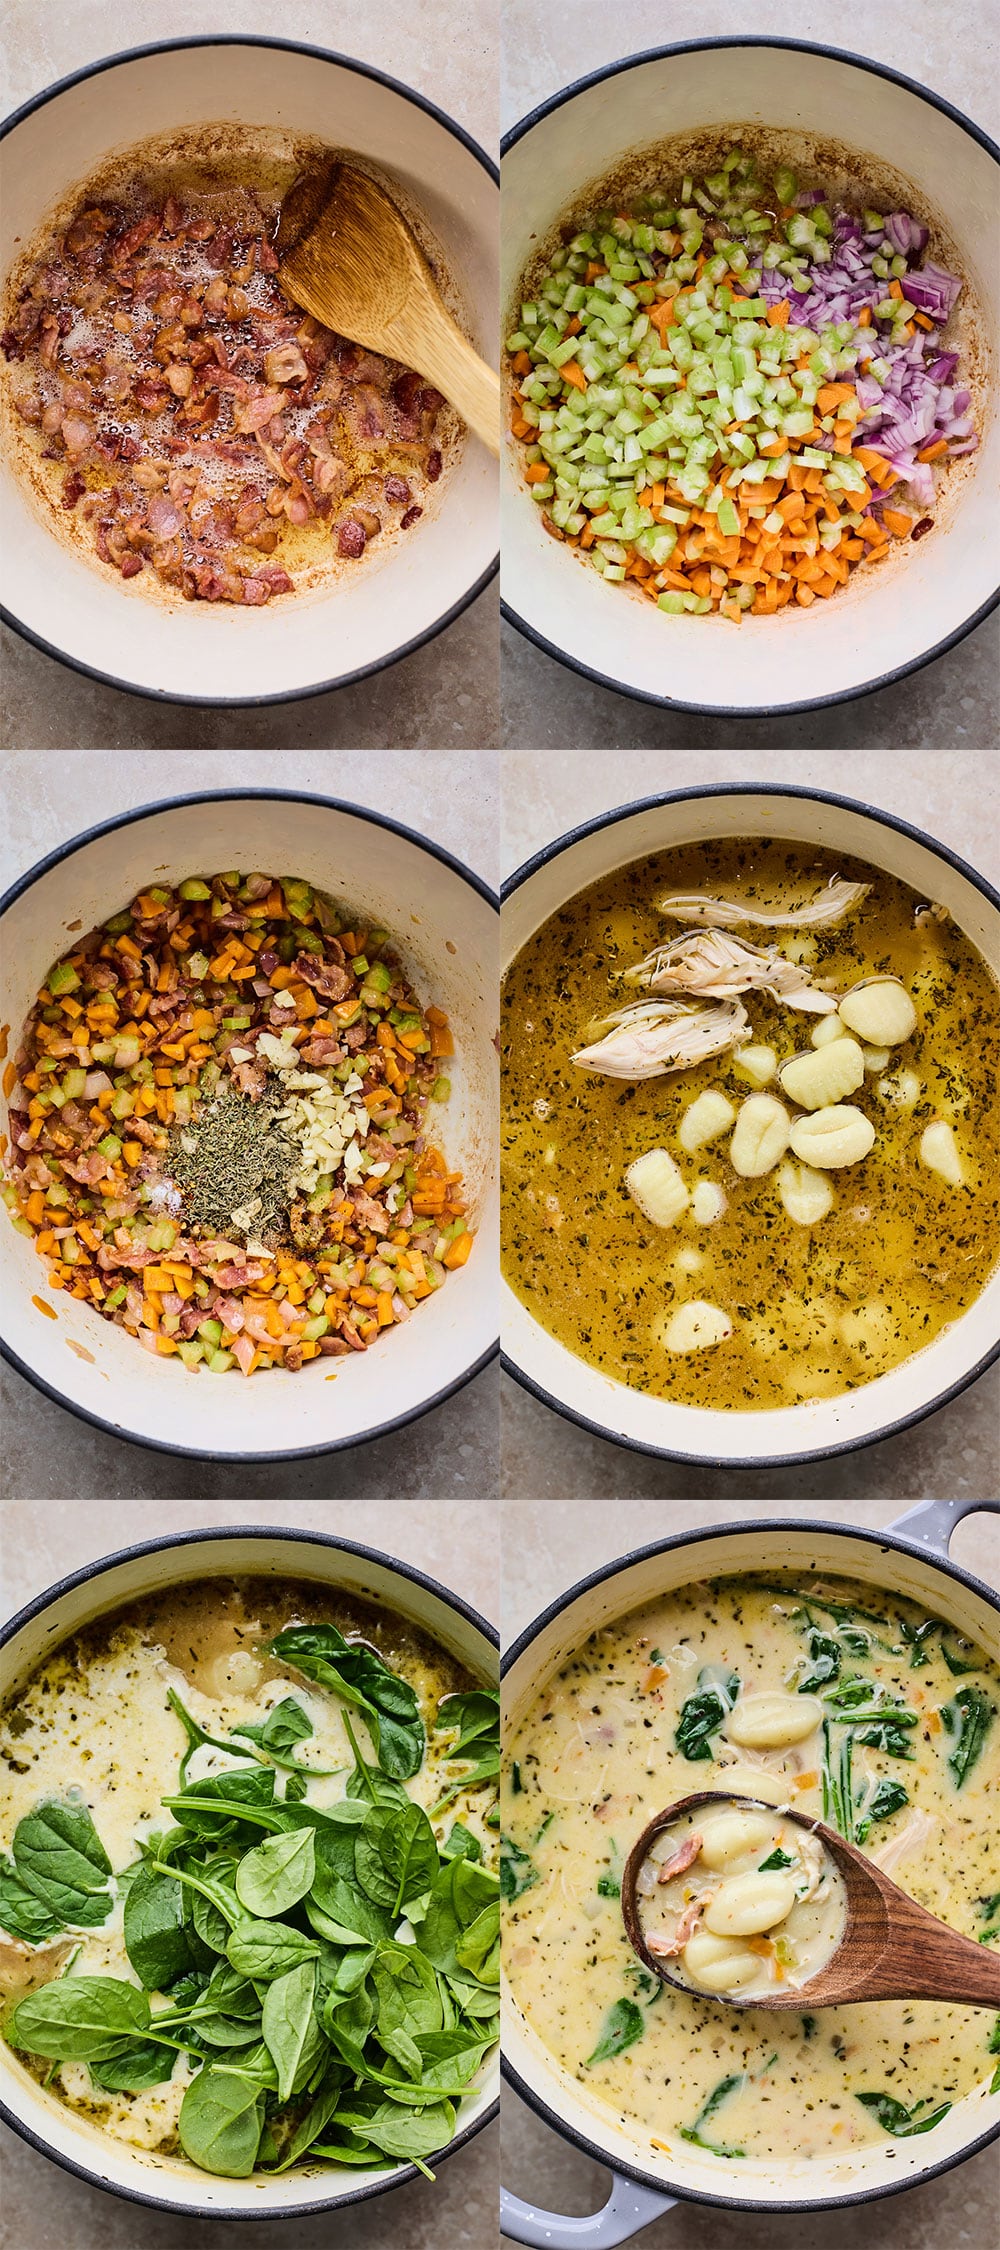 Chicken Gnocchi Soup Step By Step Instructions